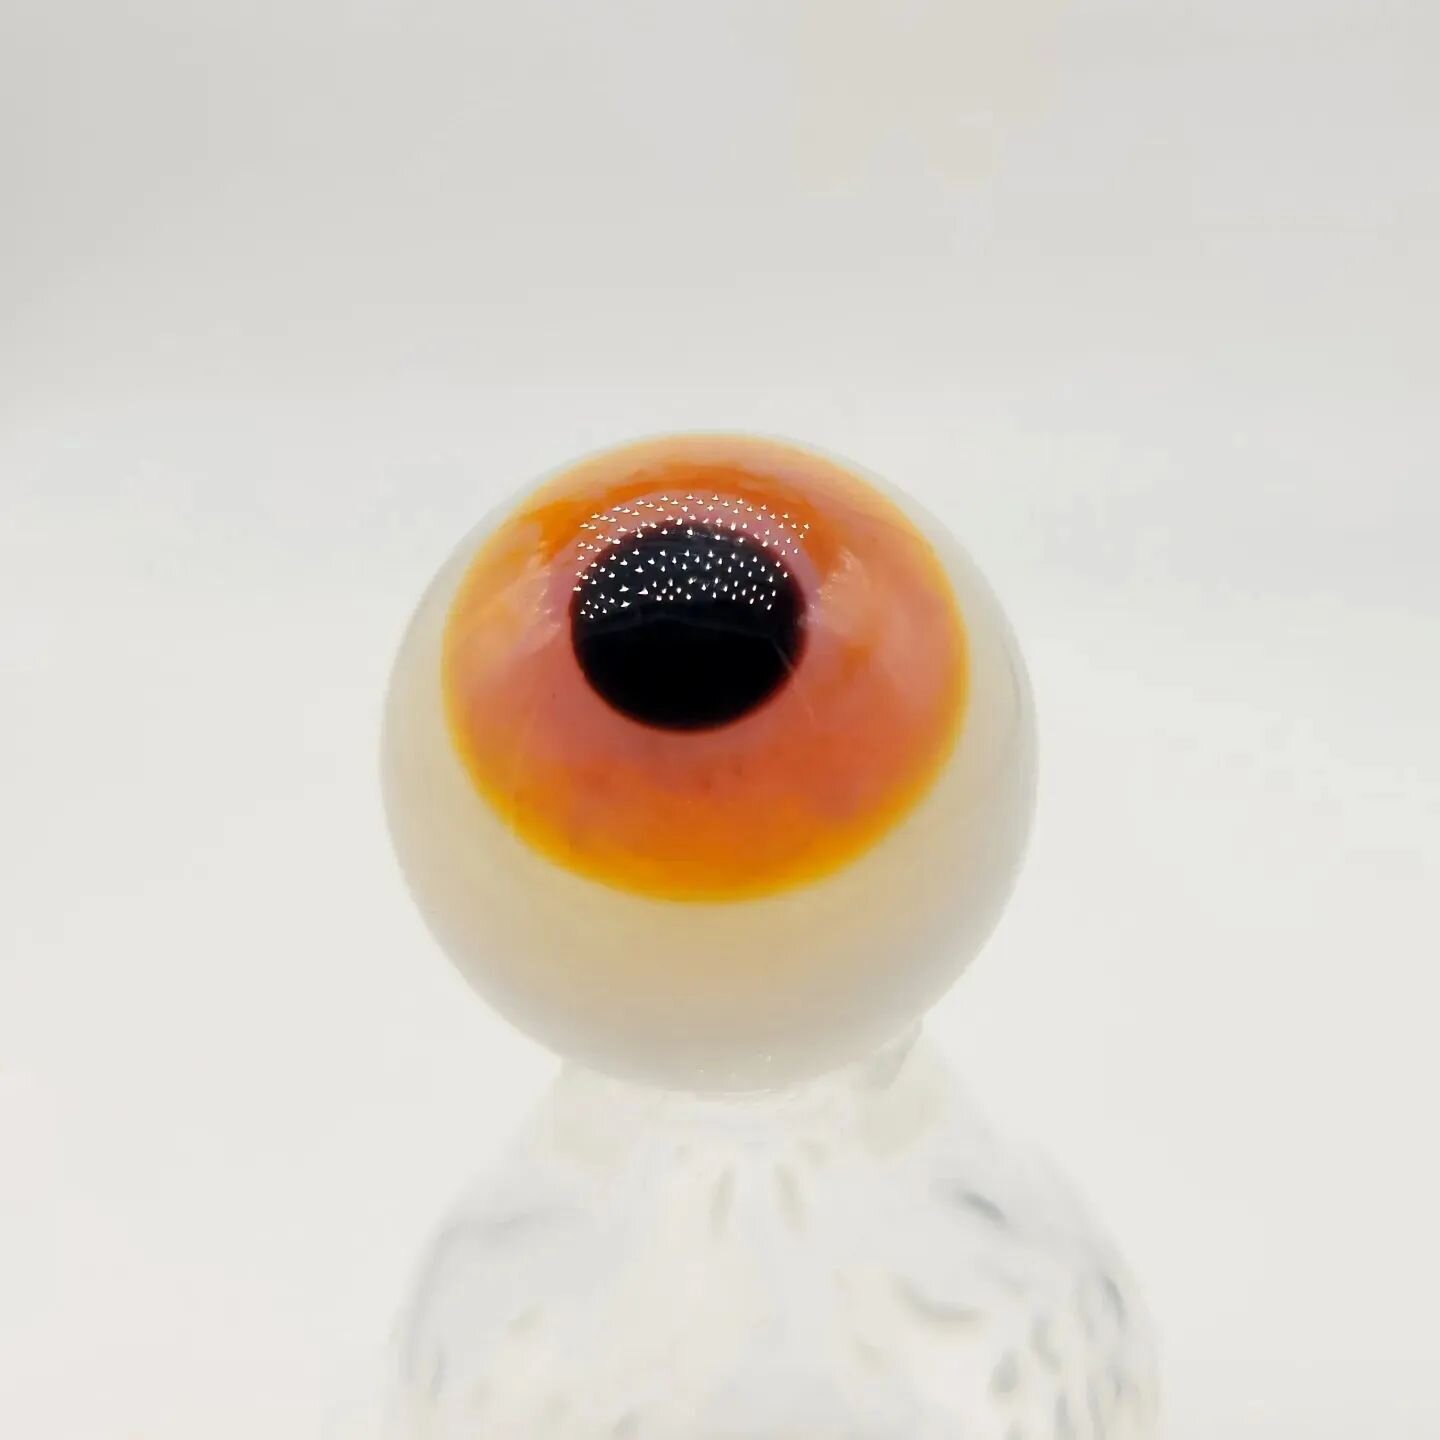 Happy Friday Friends 🙃 Today we're featuring this sweet eyeball 👁 marble, made by GriffGlass during his time working in Austin,Tx.

I hope you enjoy and as always thanks for looking : )

Jar/Marble stand not included. Stickers and next day shipping